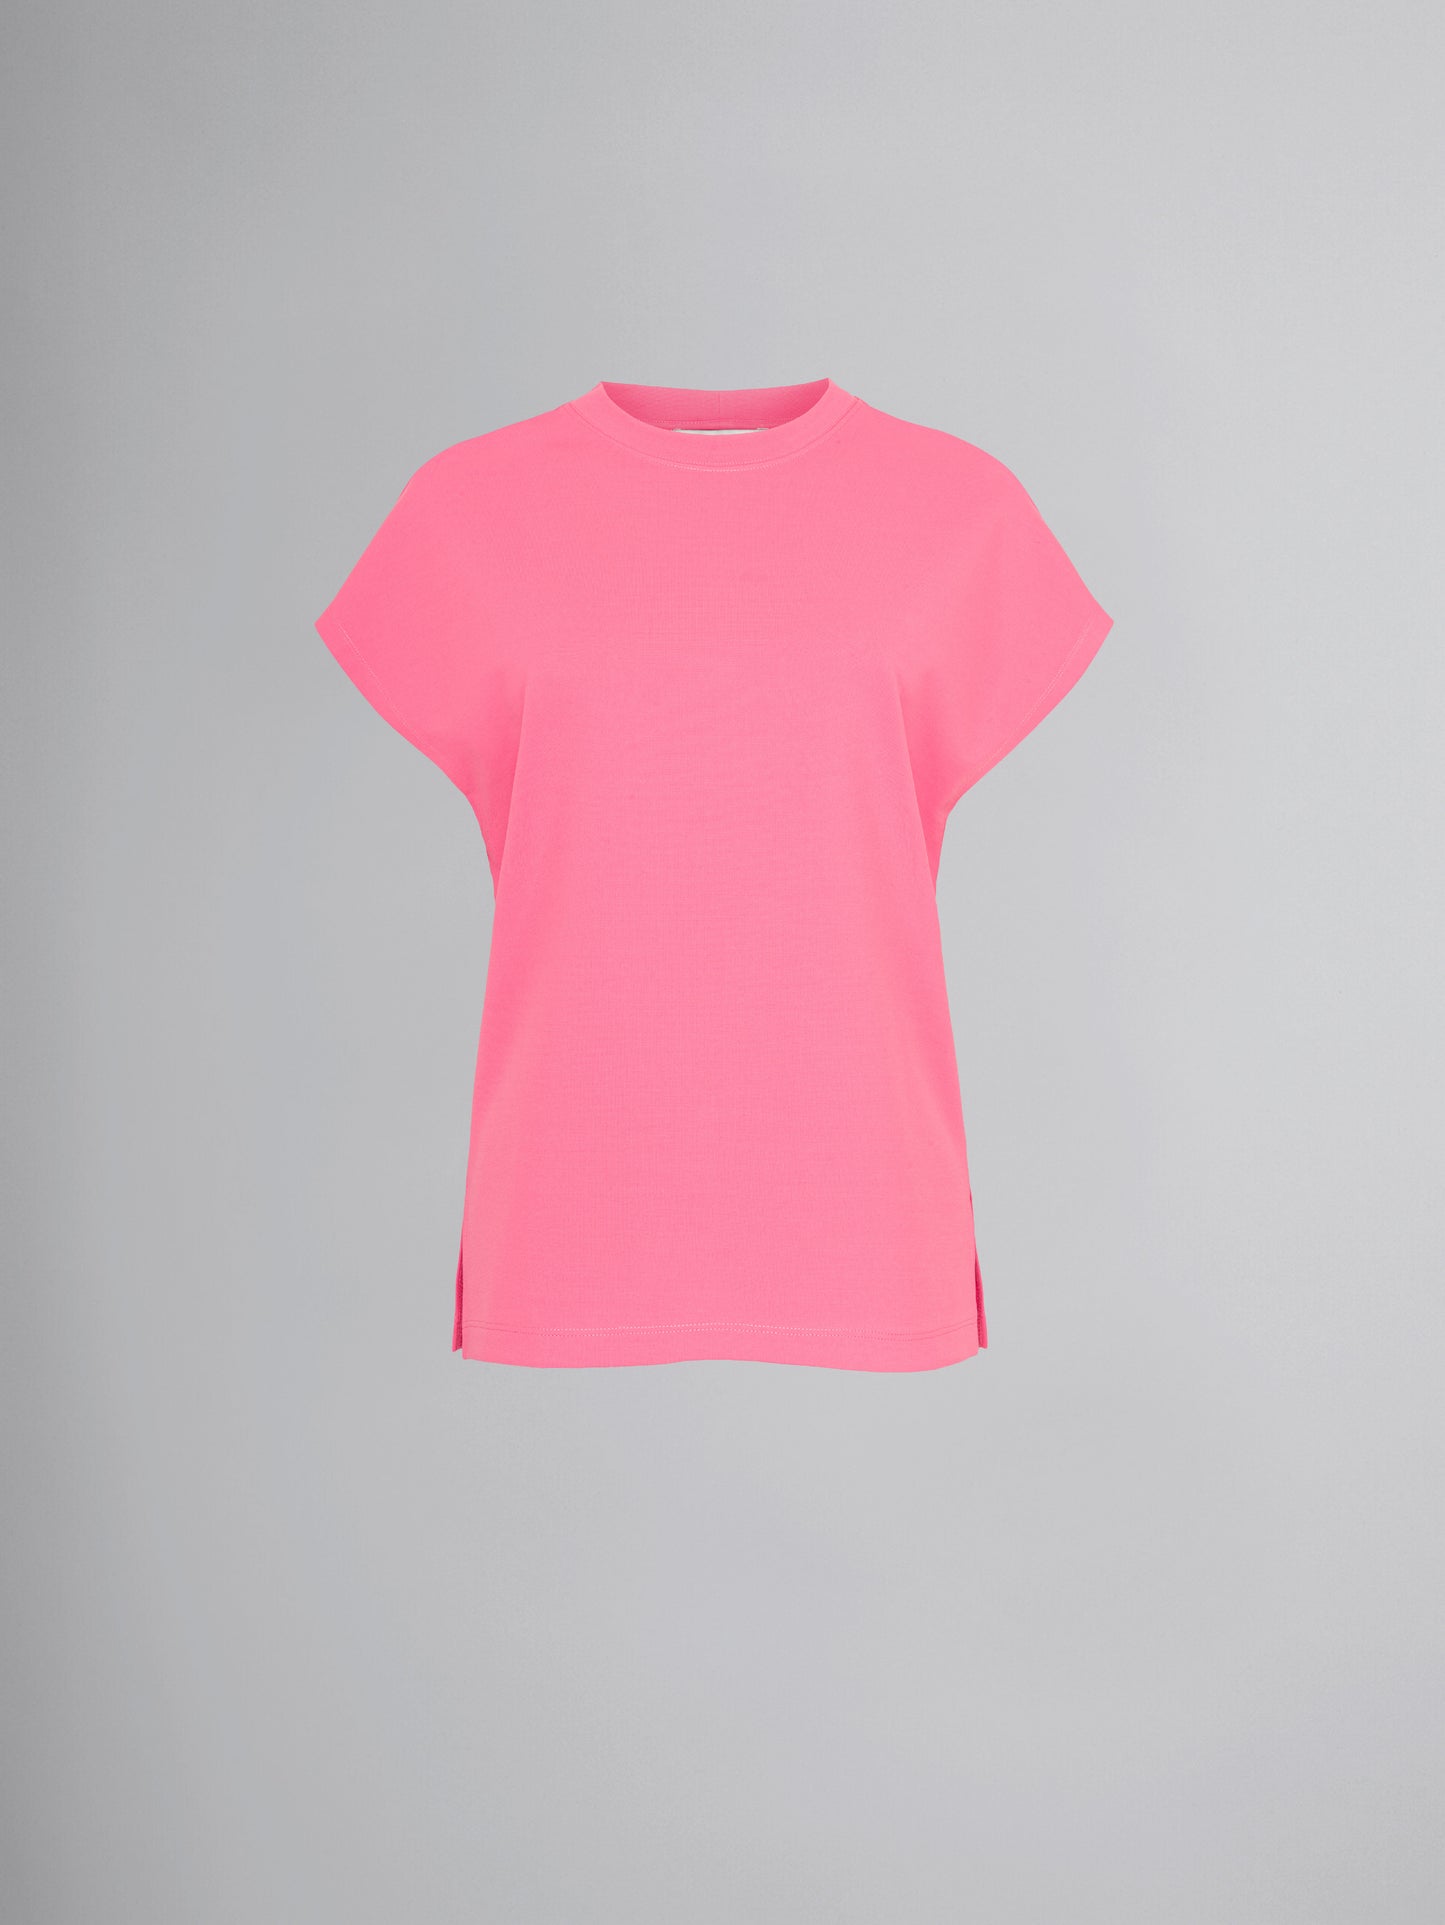 The color Shirt - pink